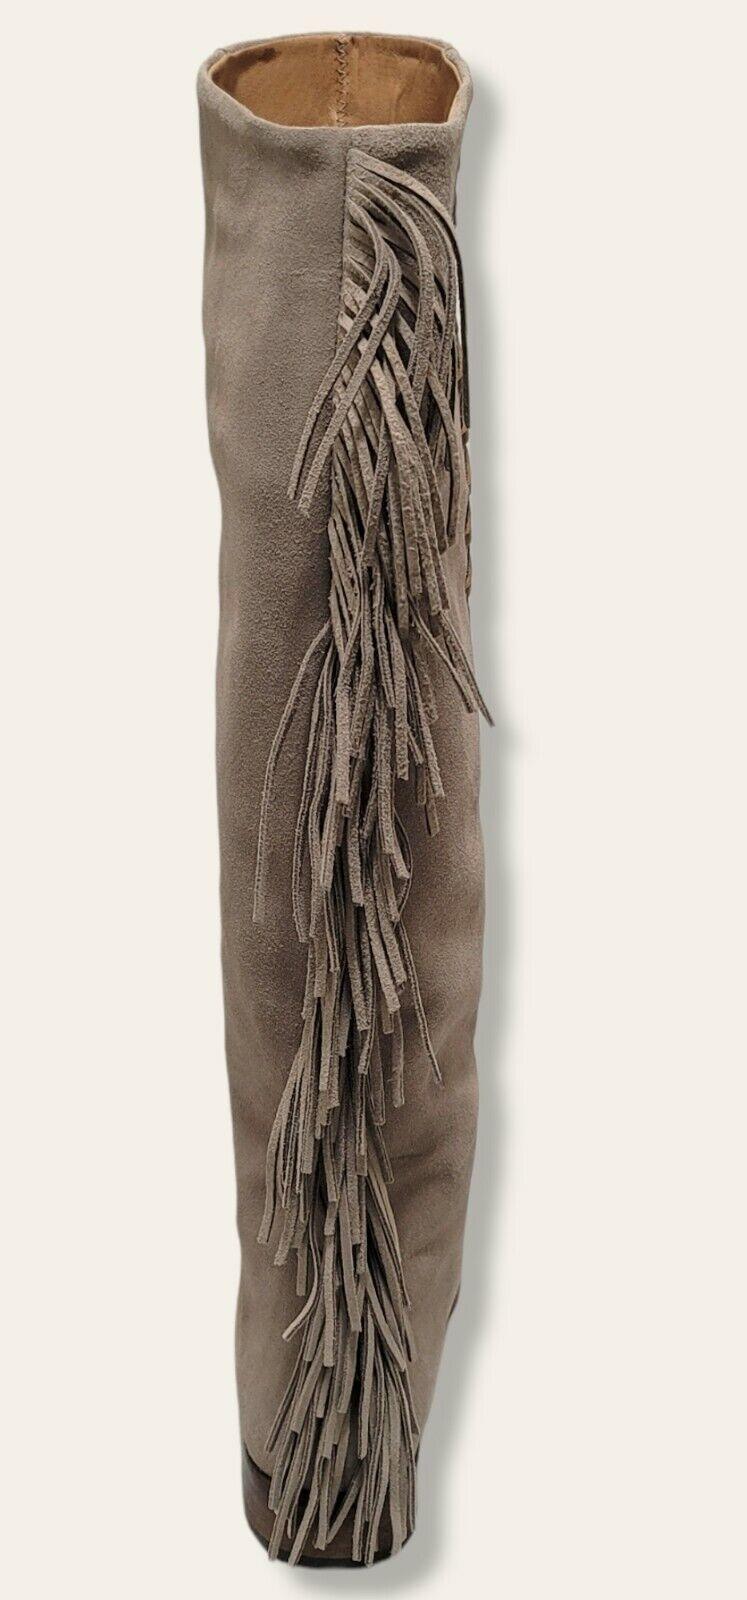 ANTHROPOLOGIE  Howsty Kindia Stone Suede Fringed Boots Size US 8 - SVNYFancy